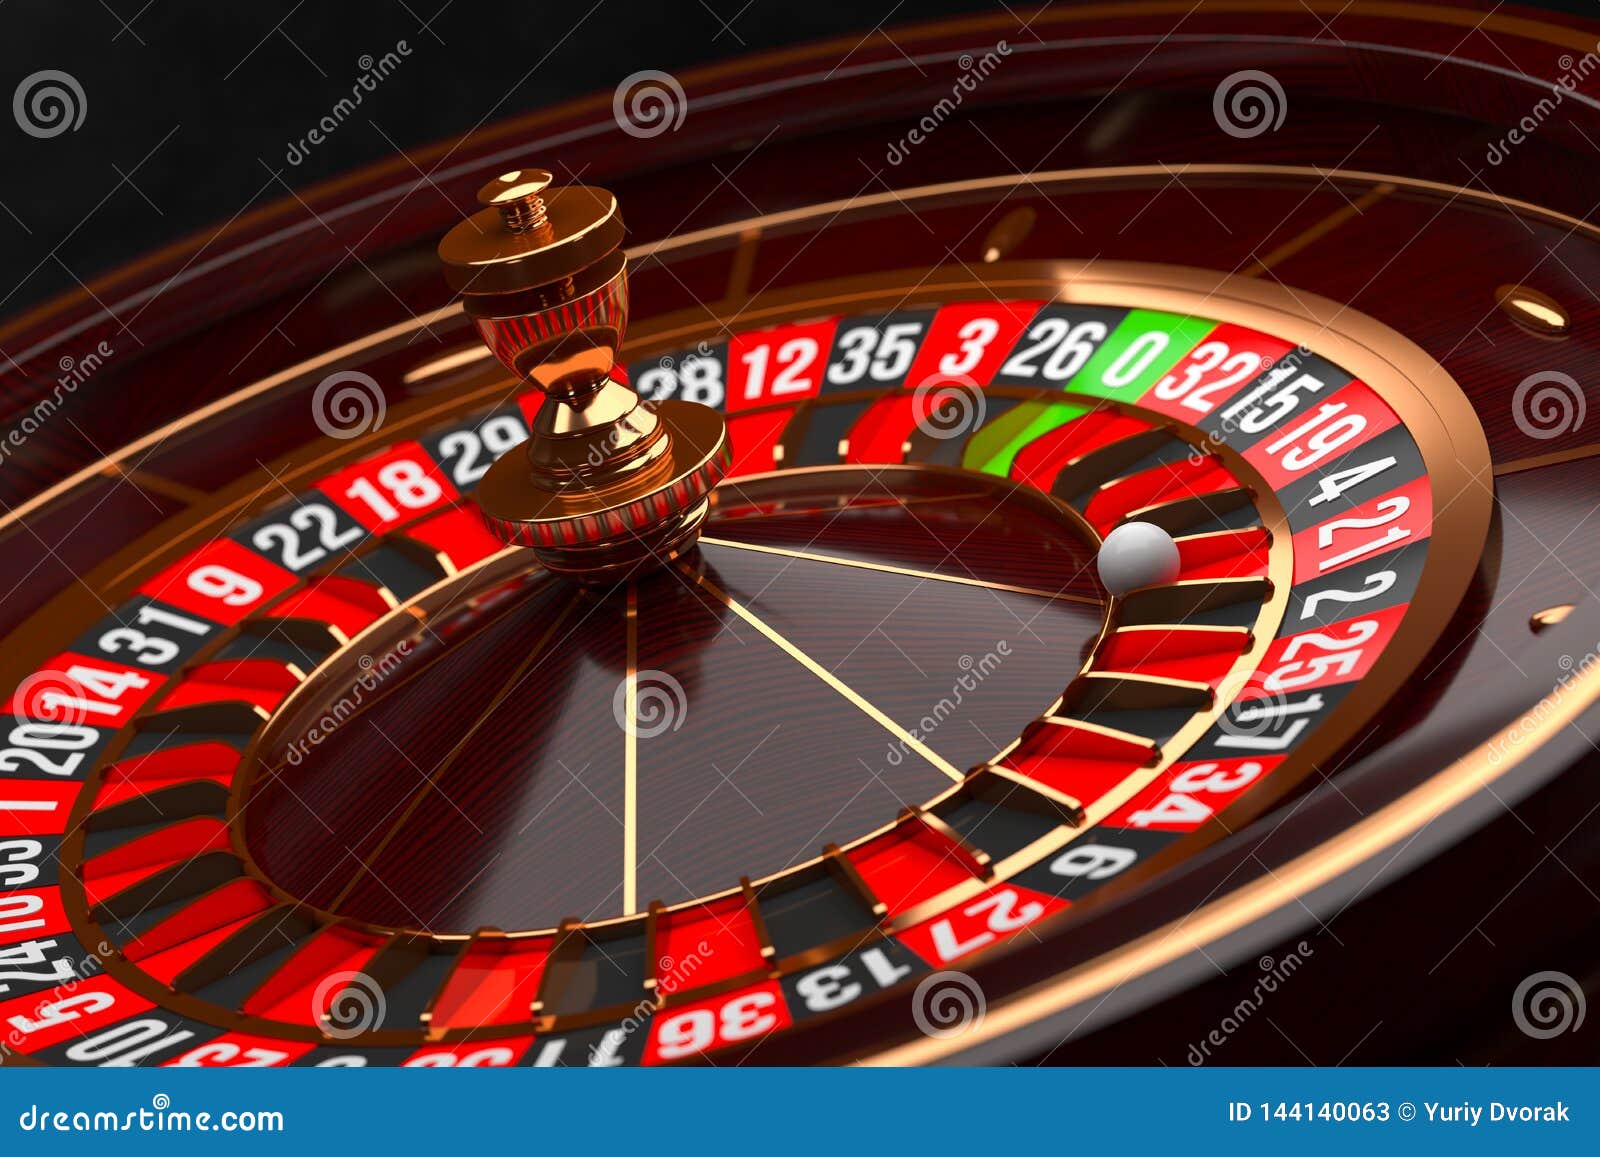 Luxury Casino Roulette Wheel on Black Background. Casino Theme. Close-up  Wooden Casino Roulette with a Ball. Poker Game Stock Image - Image of  render, circle: 144140063